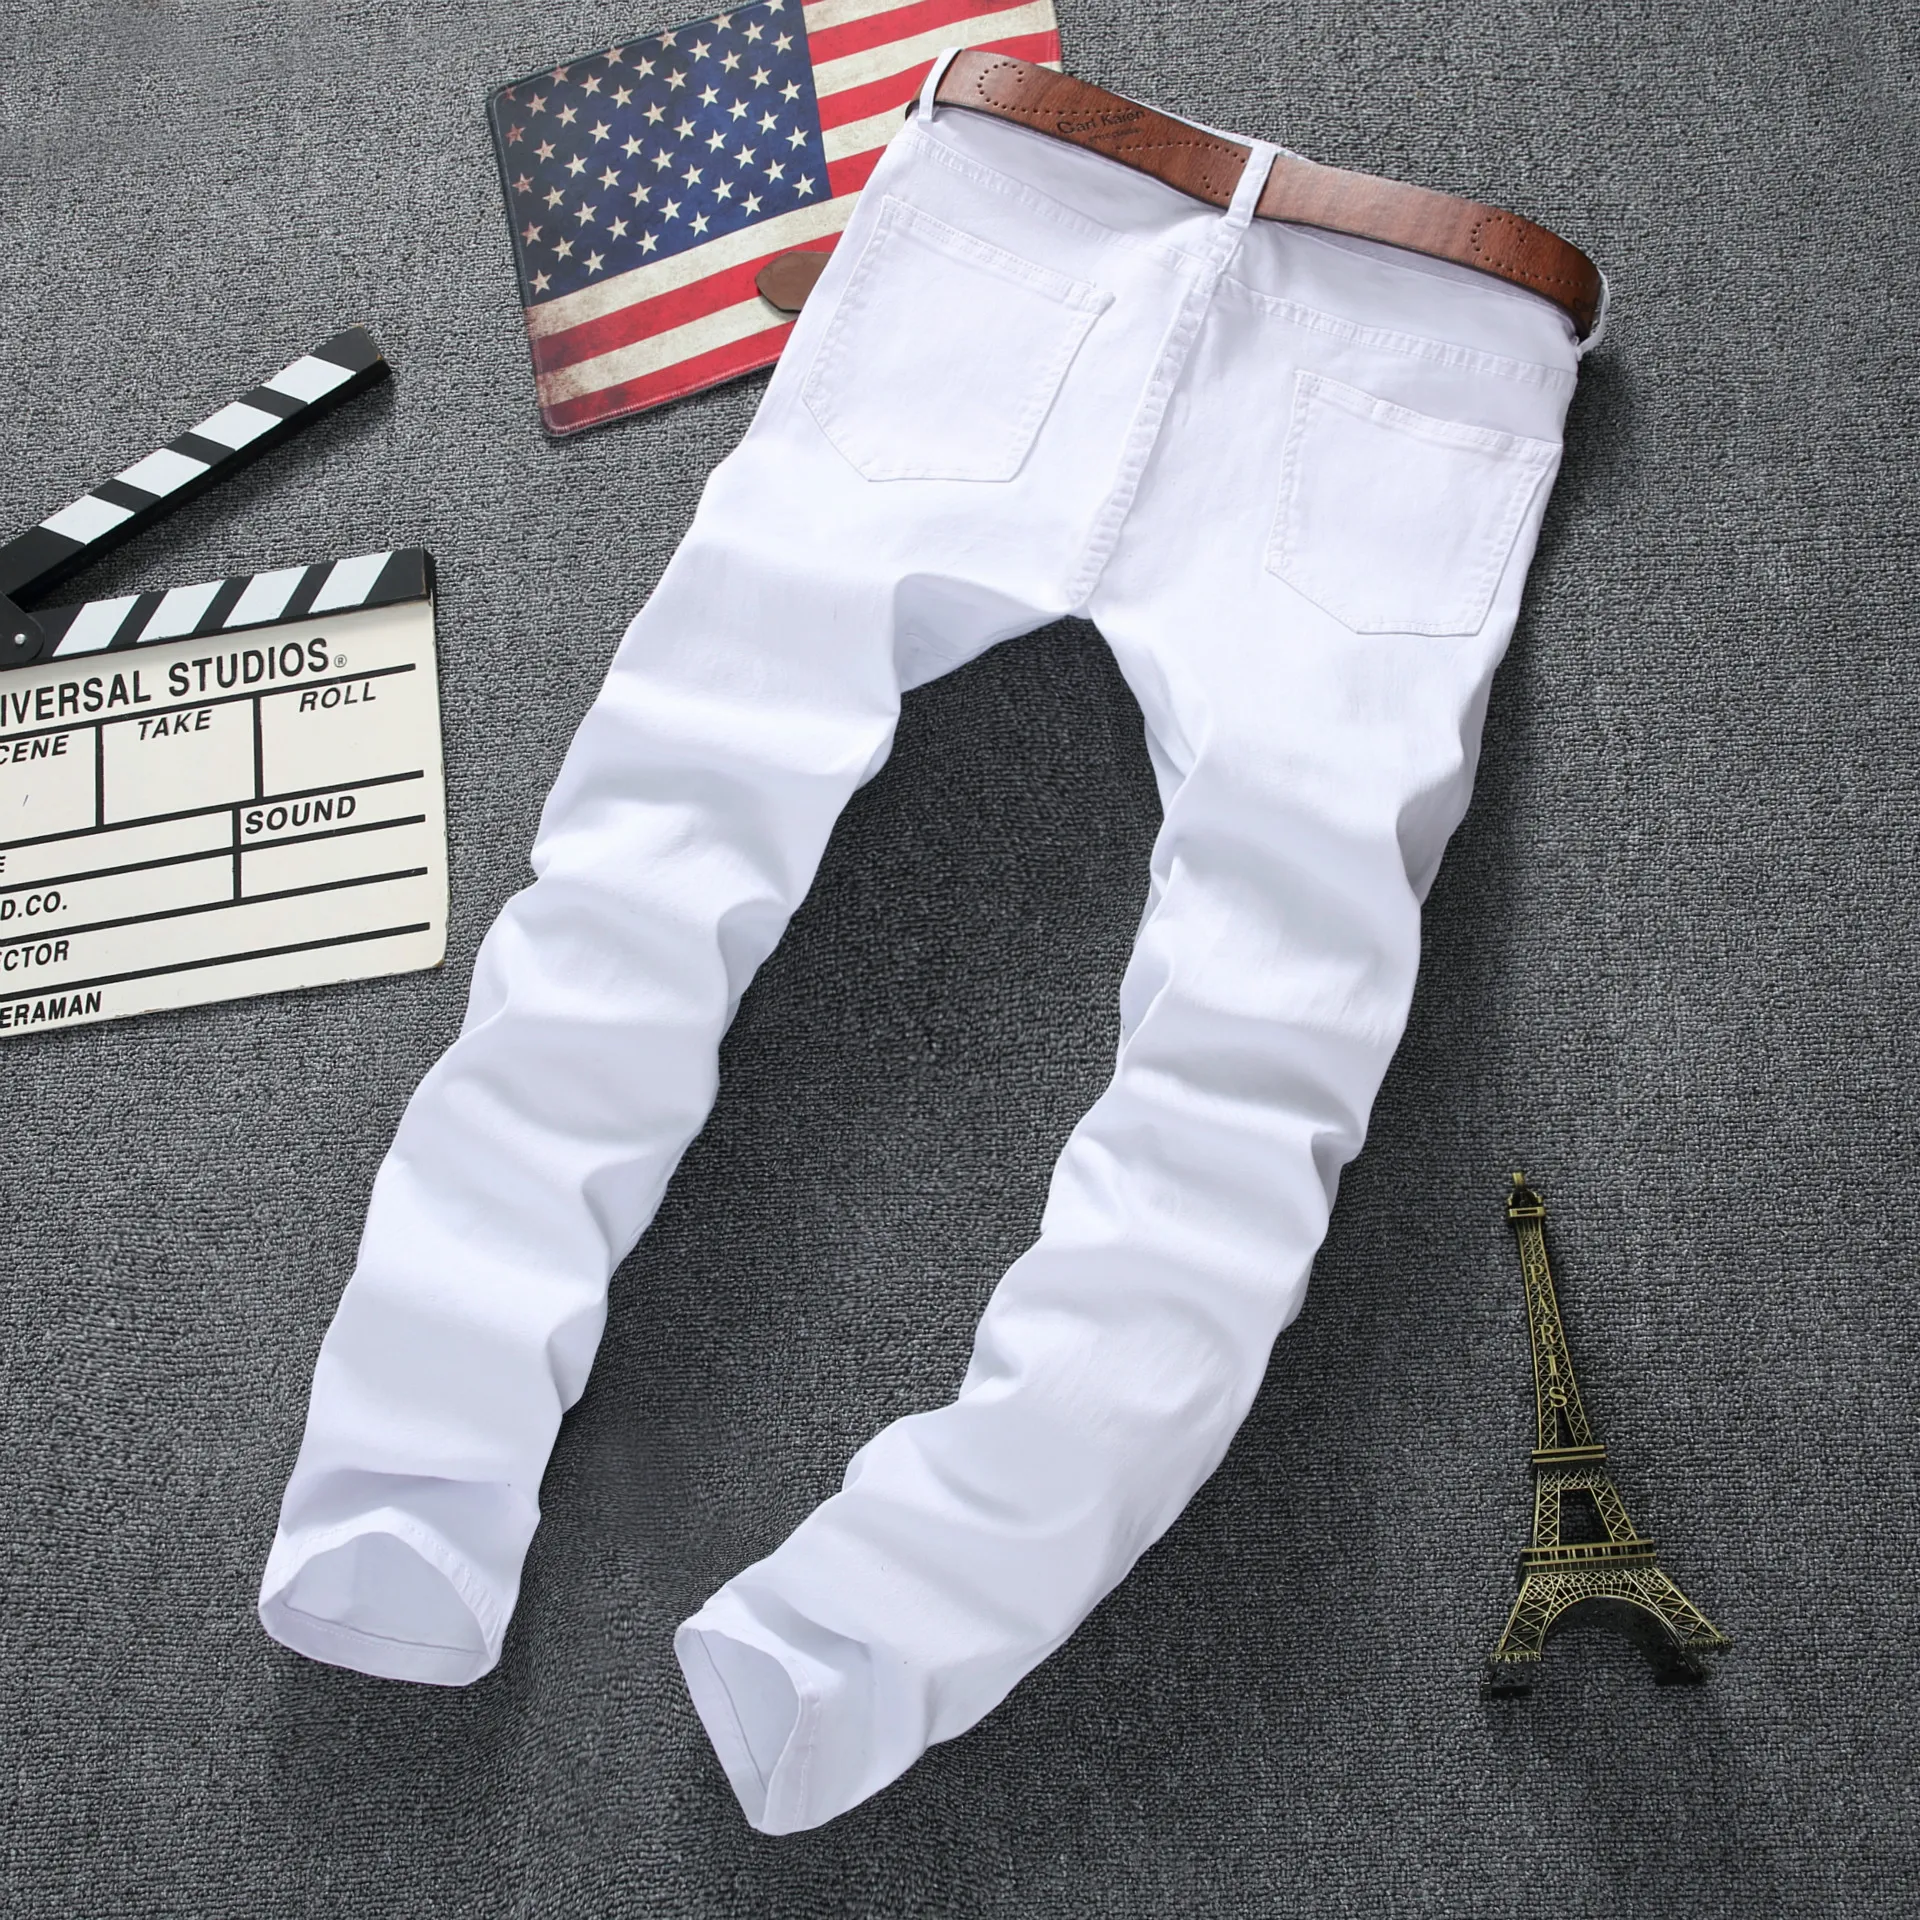 Fashion Mens Straight Slim Fit Biker Jeans Pants Distressed Skinny Ripped Destroyed Denim Jeans Washed Hiphop Trousers Black